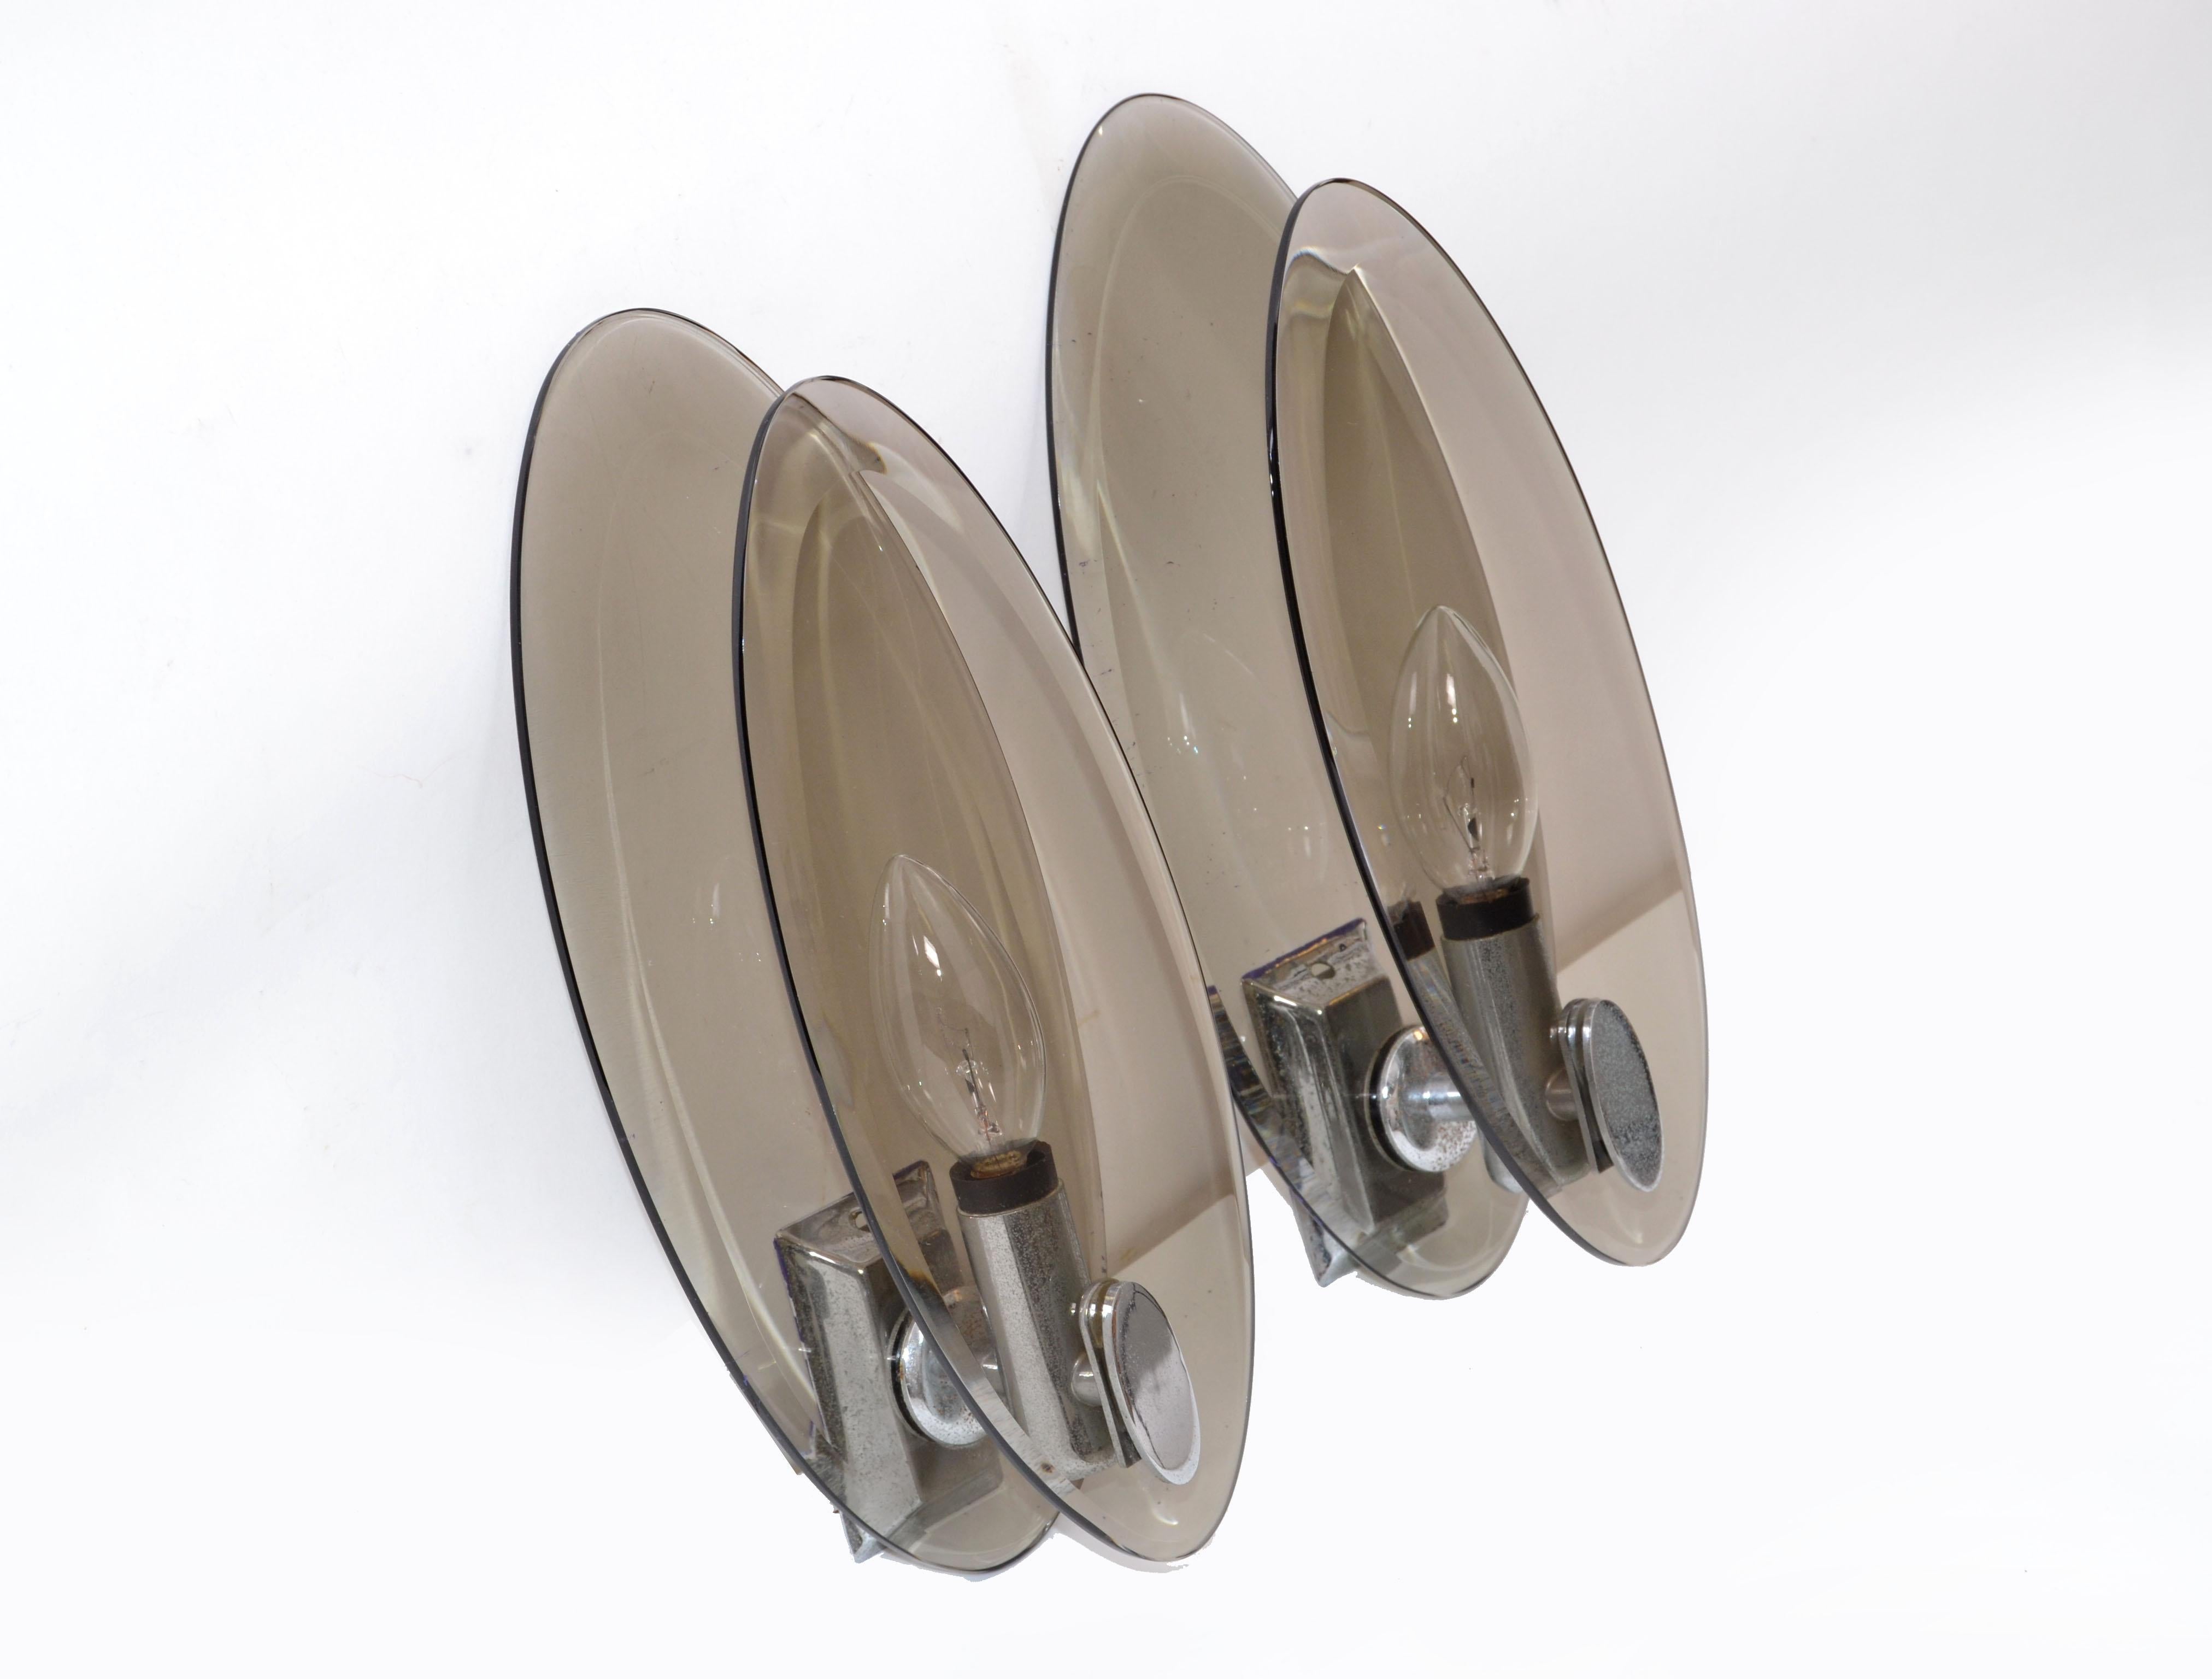 A pair of Italian Mid-Century Modern sconces by Fontana Arte featuring oval panels of smoked, beveled glass.
U.S. wired and in working condition.
Each sconce takes one 40W bulb per sconce.
Back plate: 3.75 inches H. x 1.25 inches W.